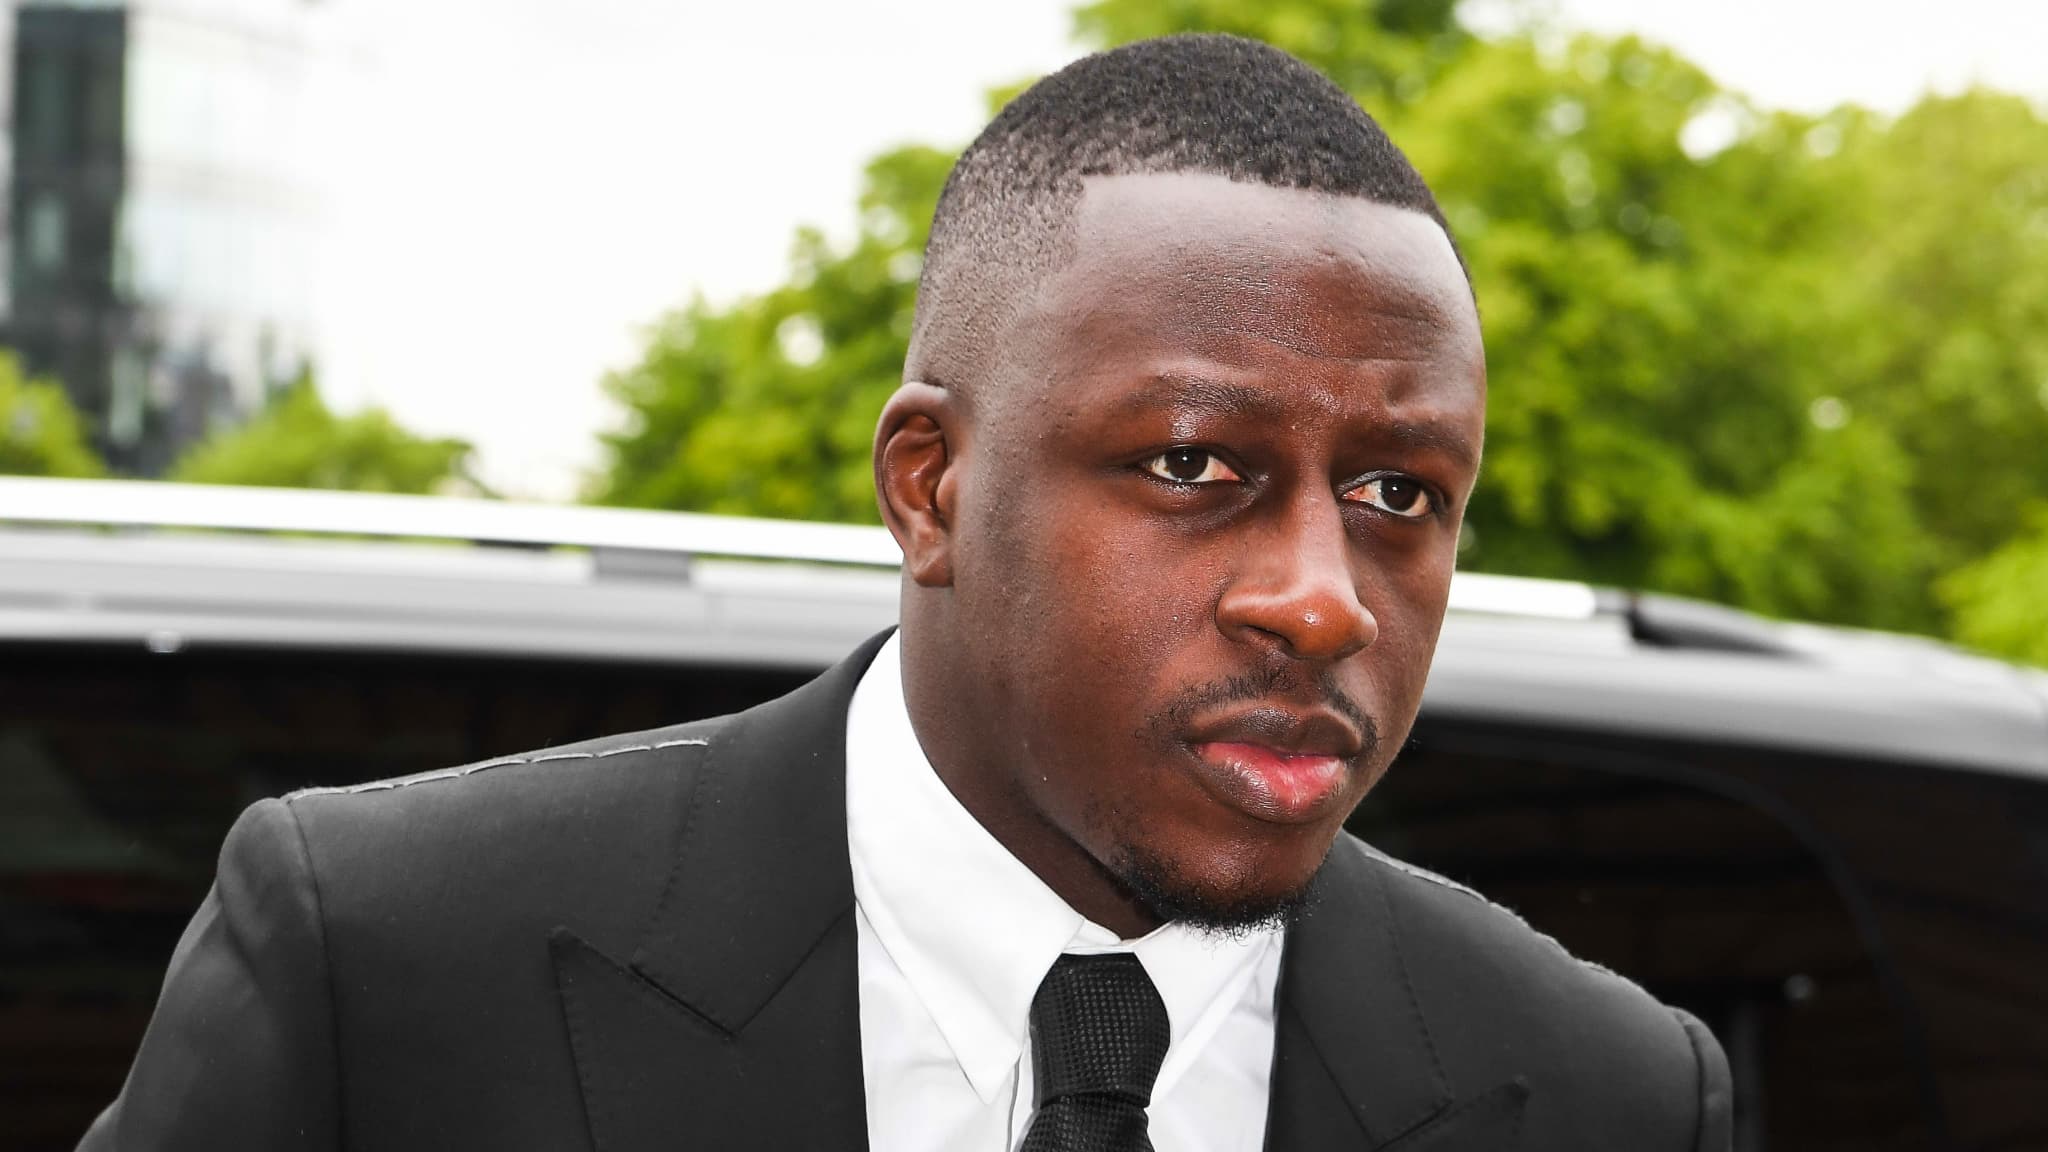 Man City soccer player Benjamin Mendy found not guilty of six counts of rape